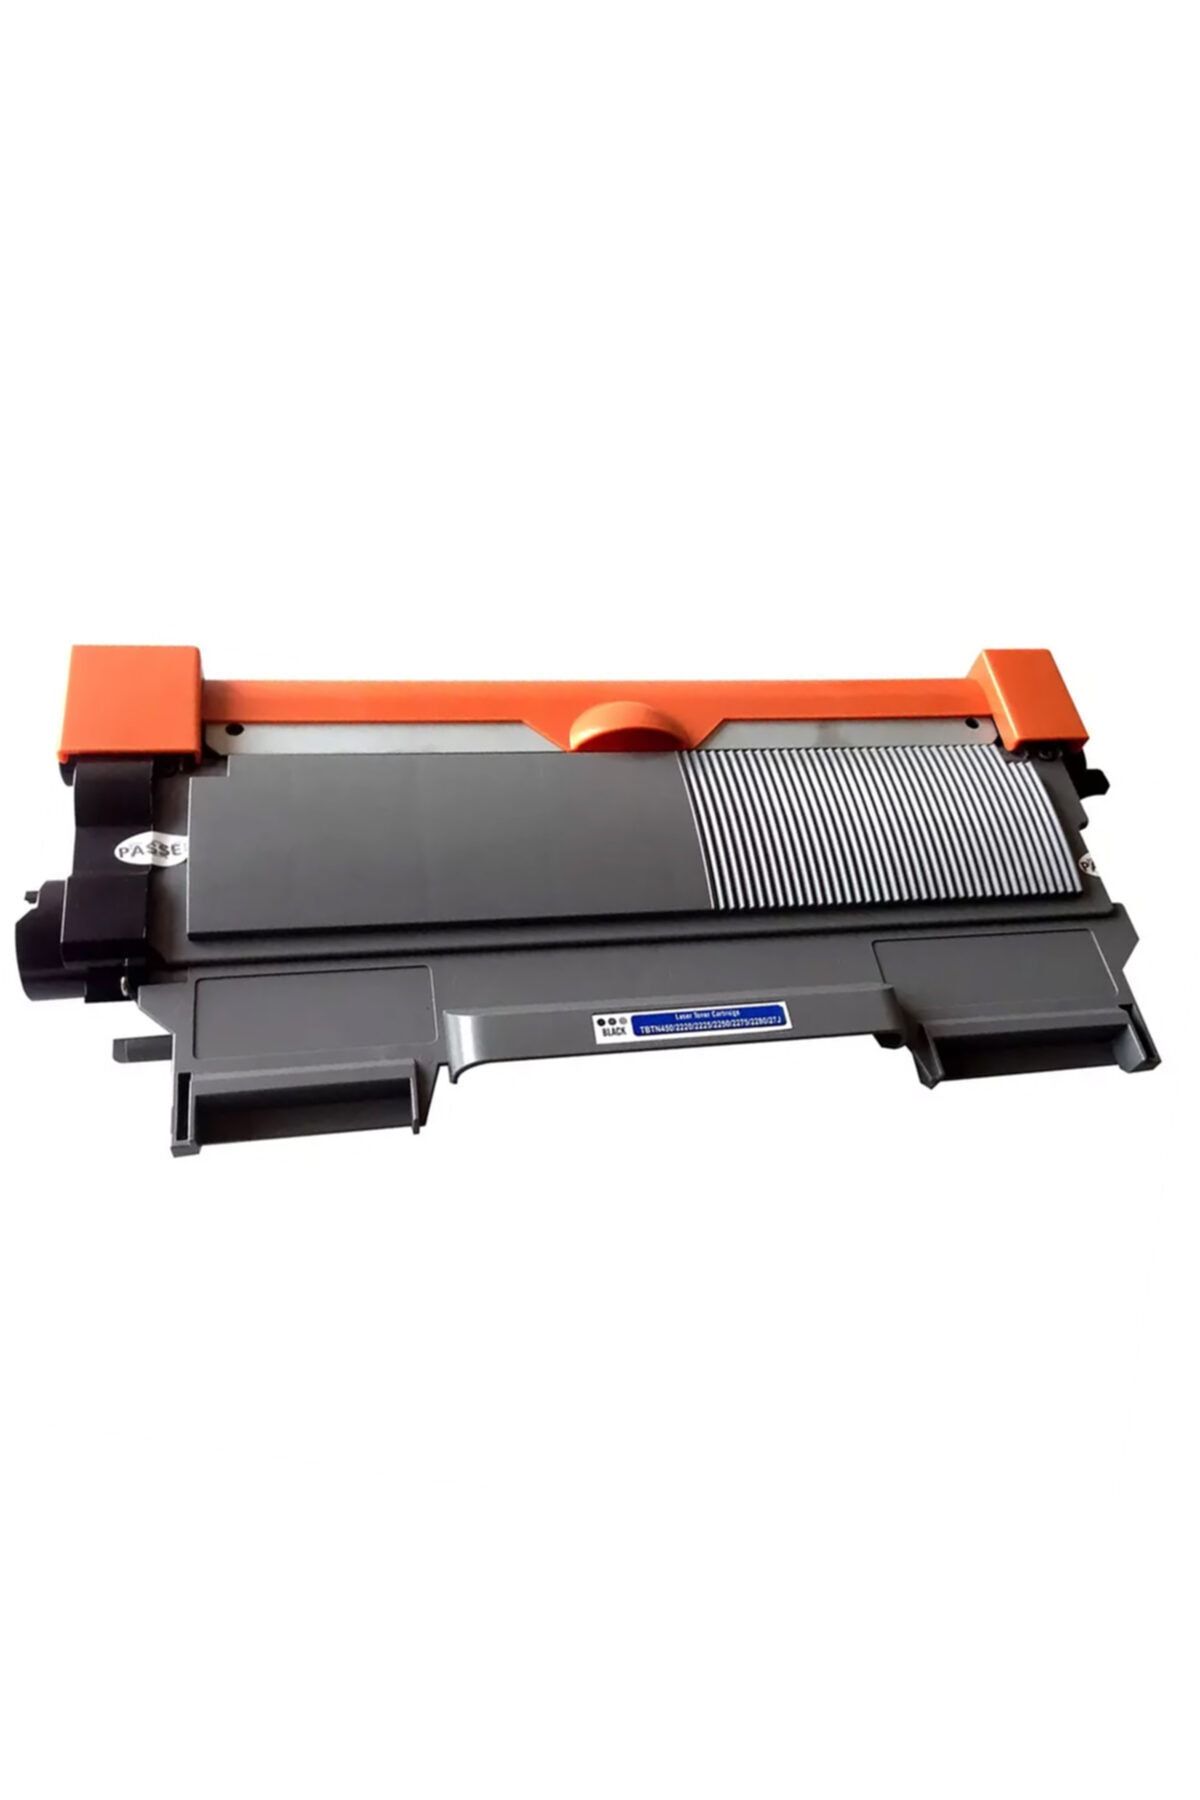 4F For Brother Tn2060/tn2280 Toner Muadil Hl2130 / Dcp7055 / Mfc7360 7860dw